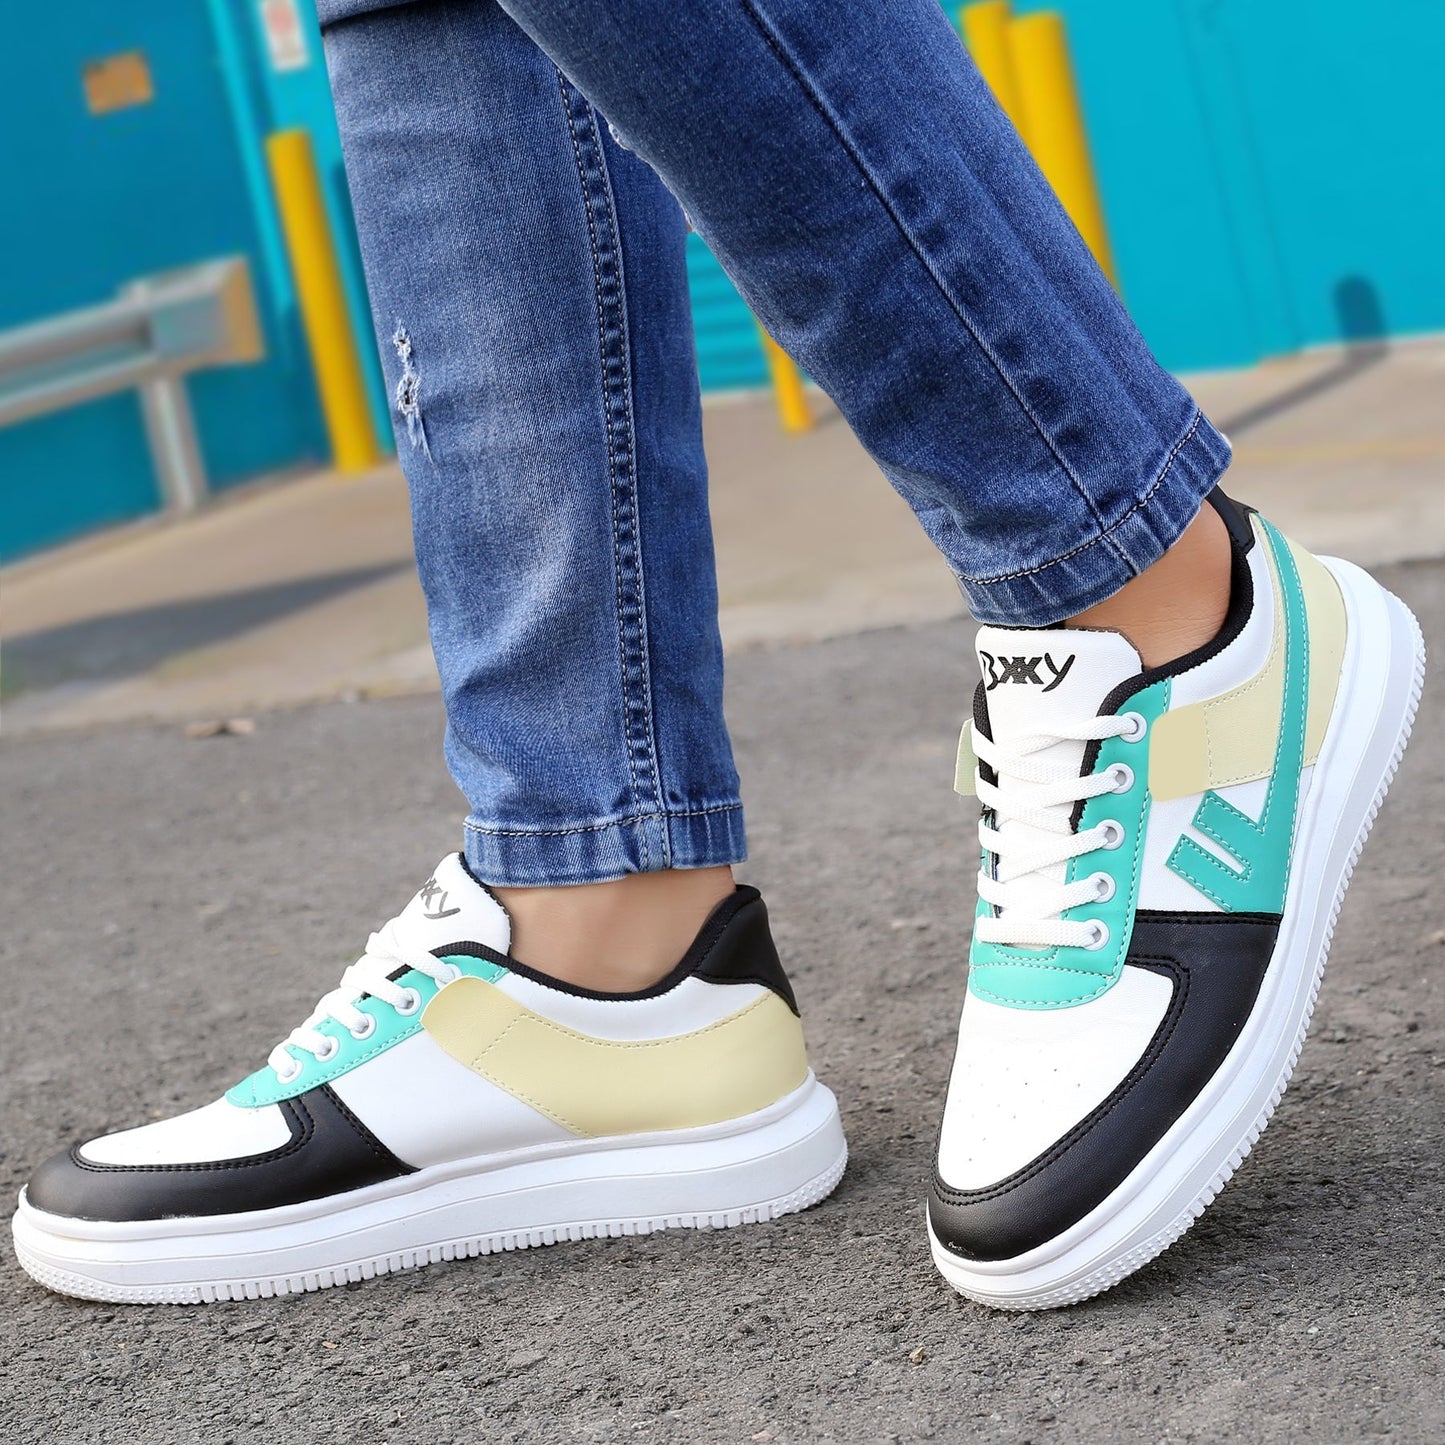 Men's Classic Street Style Chunky Sneakers